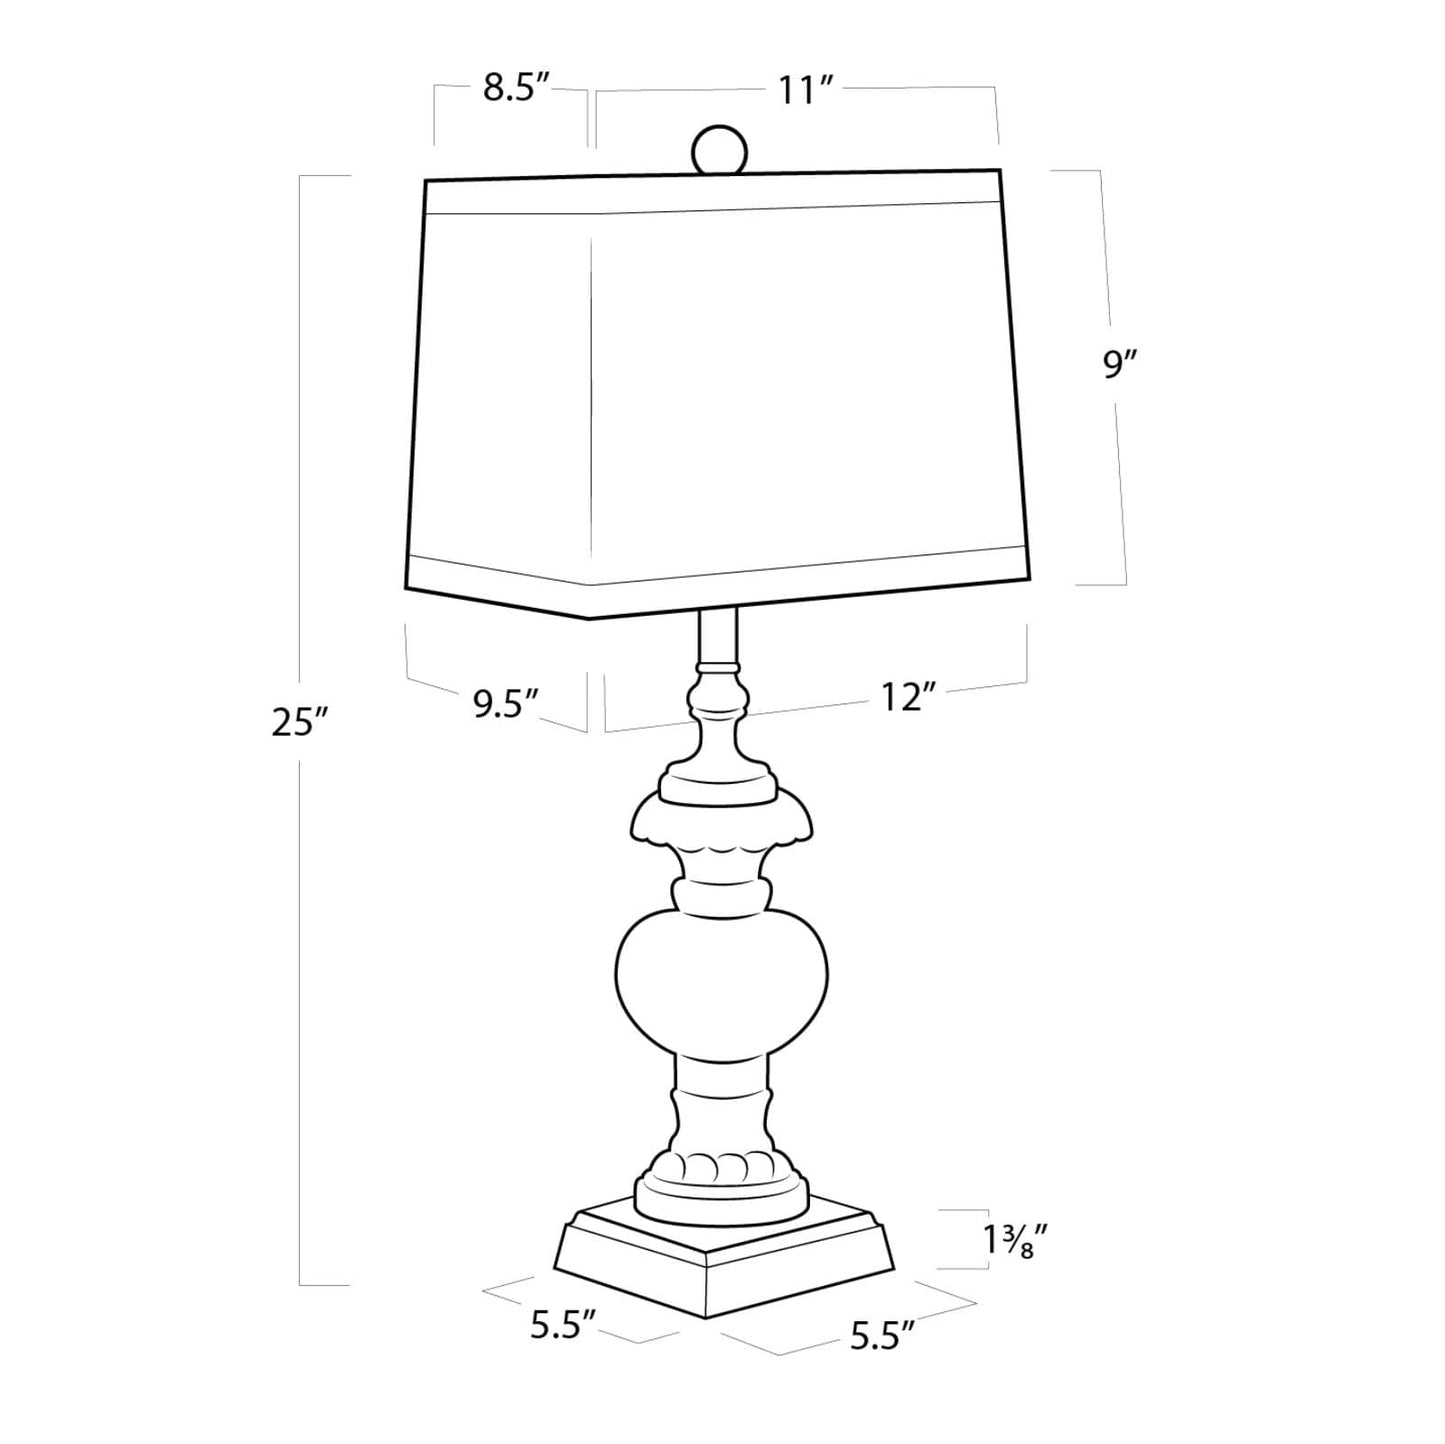 Southern Living Parisian Glass Table Lamp